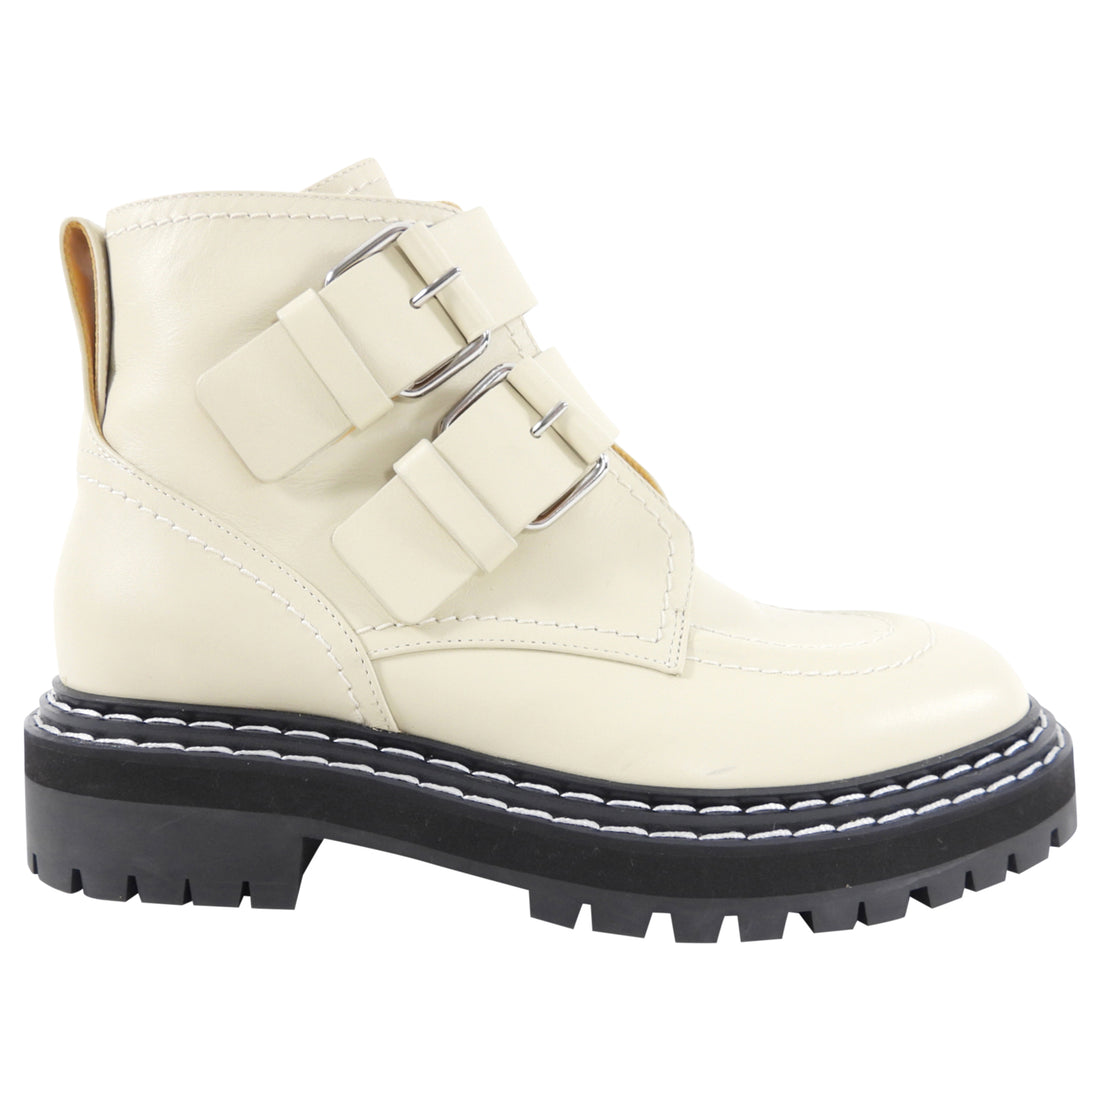 Proenza Schouler ivory Leather Buckle Combat Boots - 39